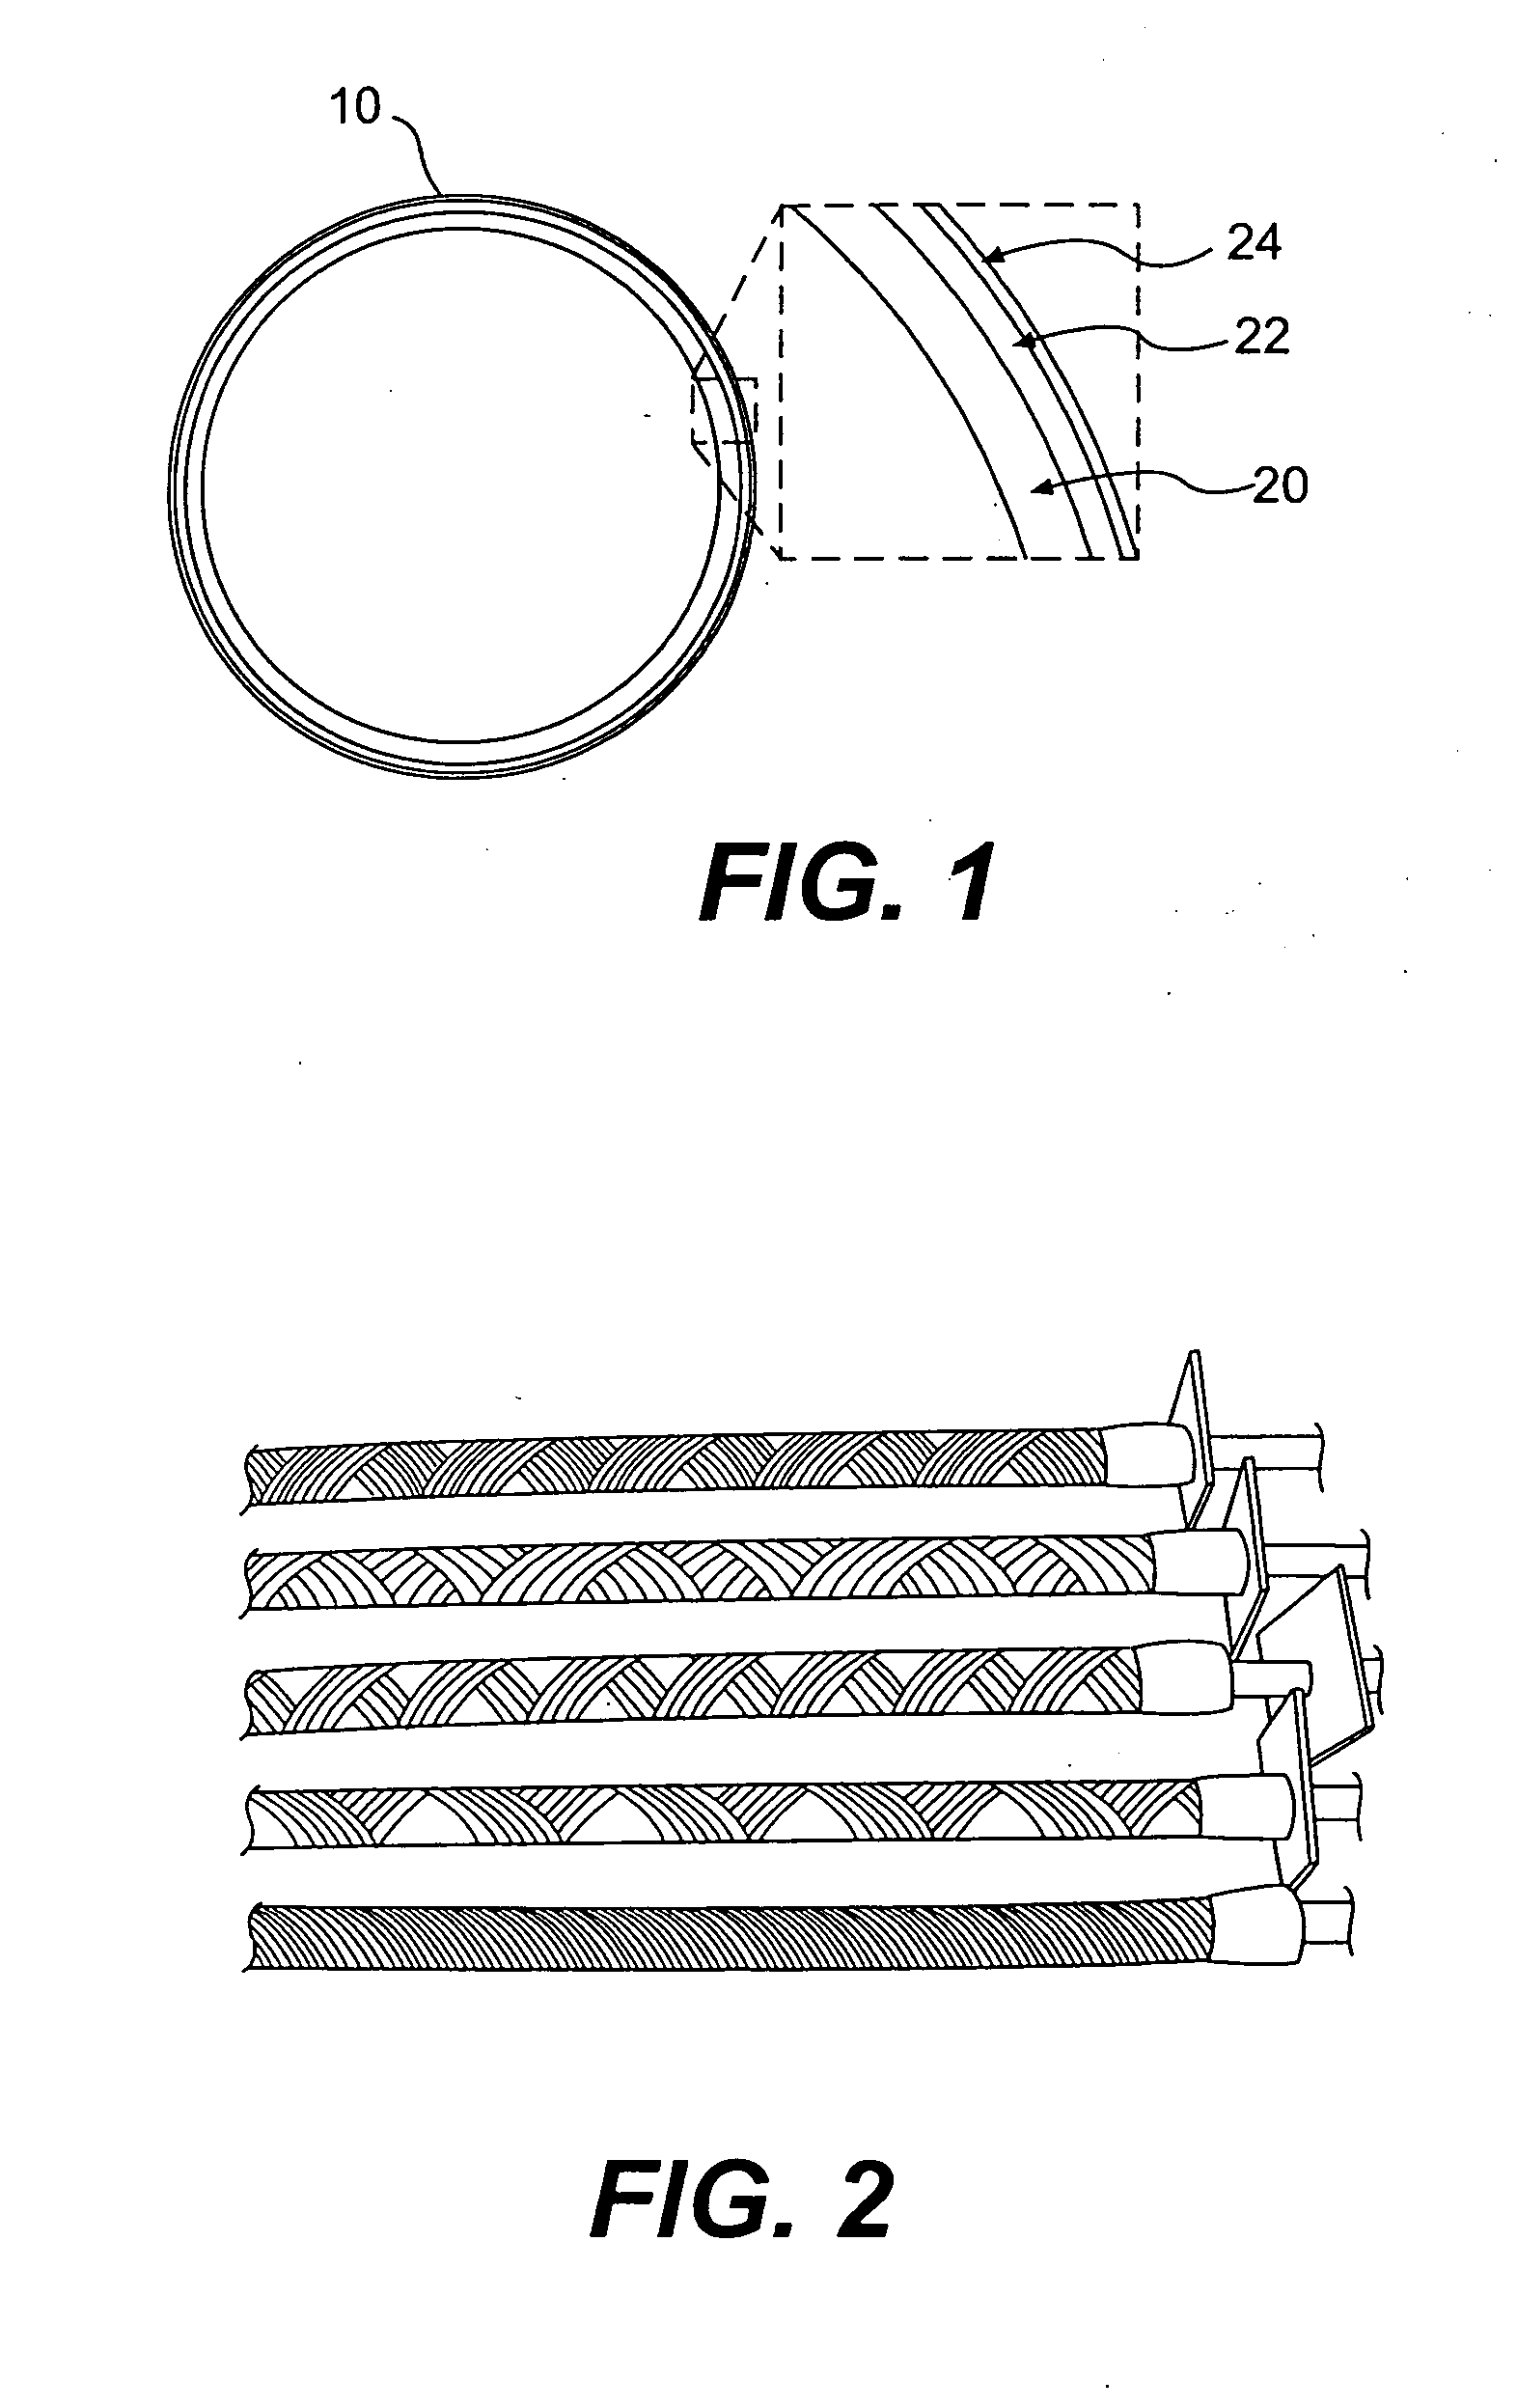 Multi-layered ceramic tube for fuel containment barrier and other applications in nuclear and fossil power plants